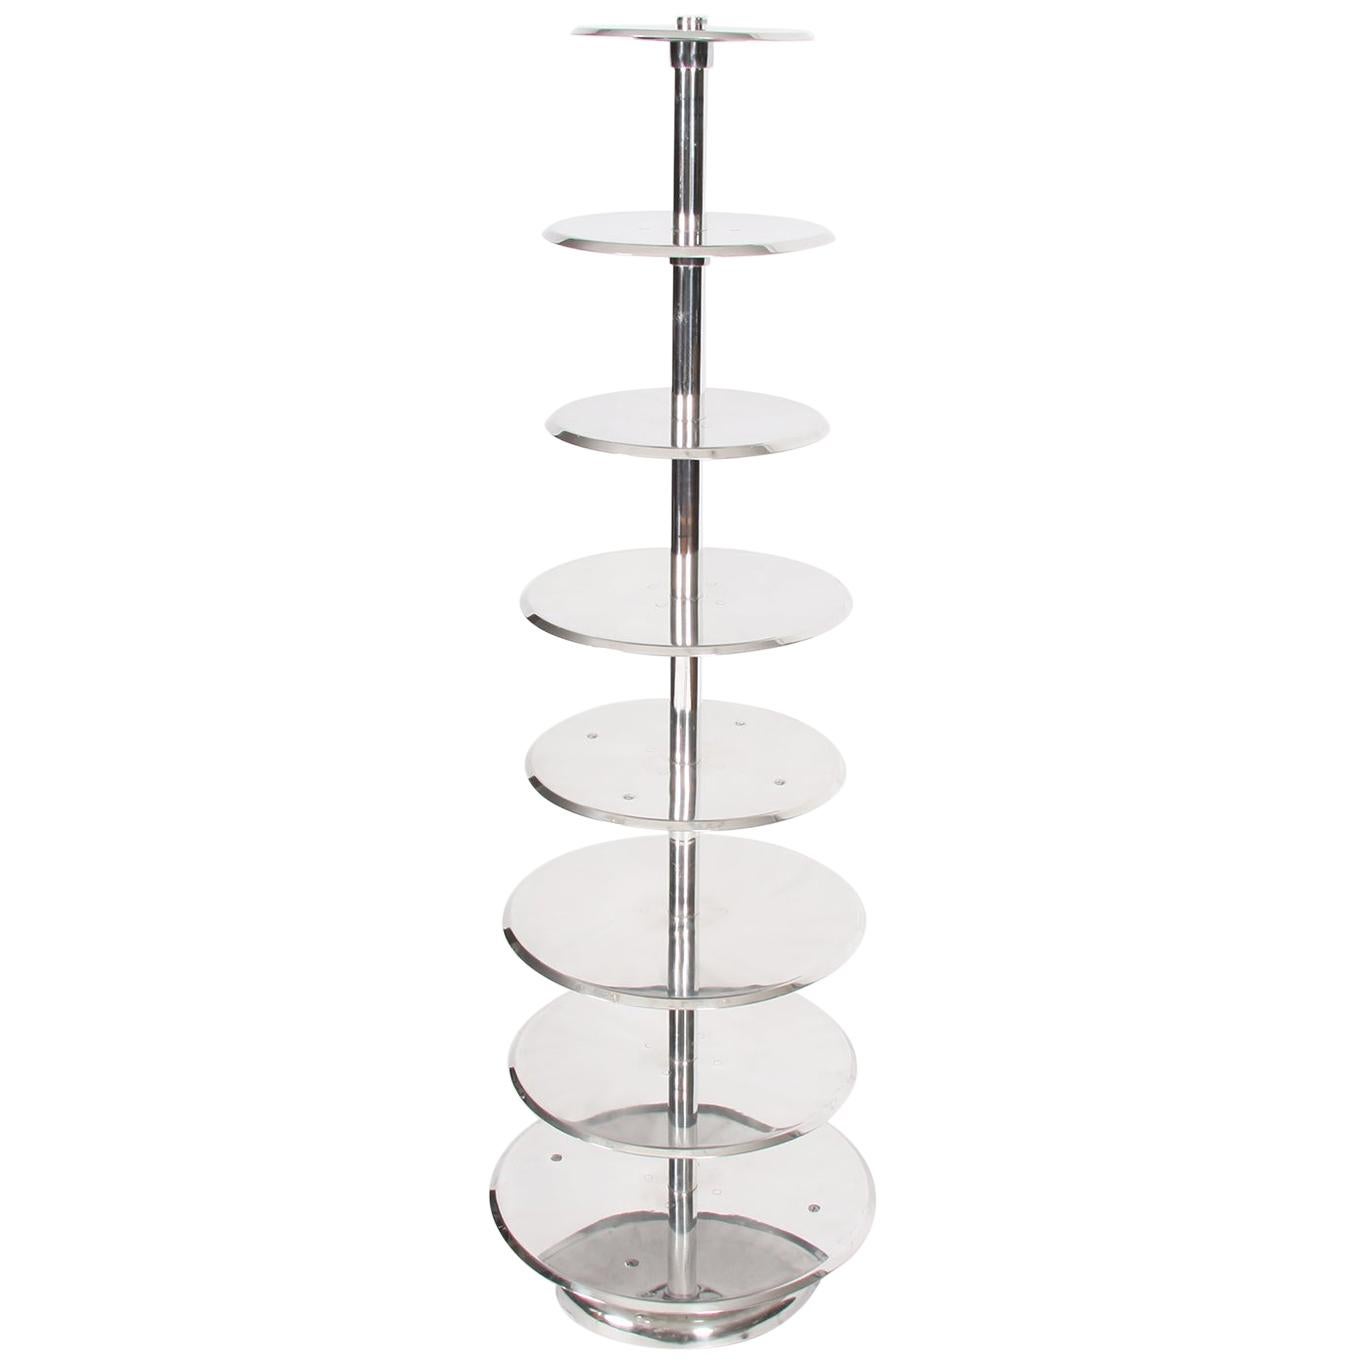 Polished Aluminium Patisserie Stand